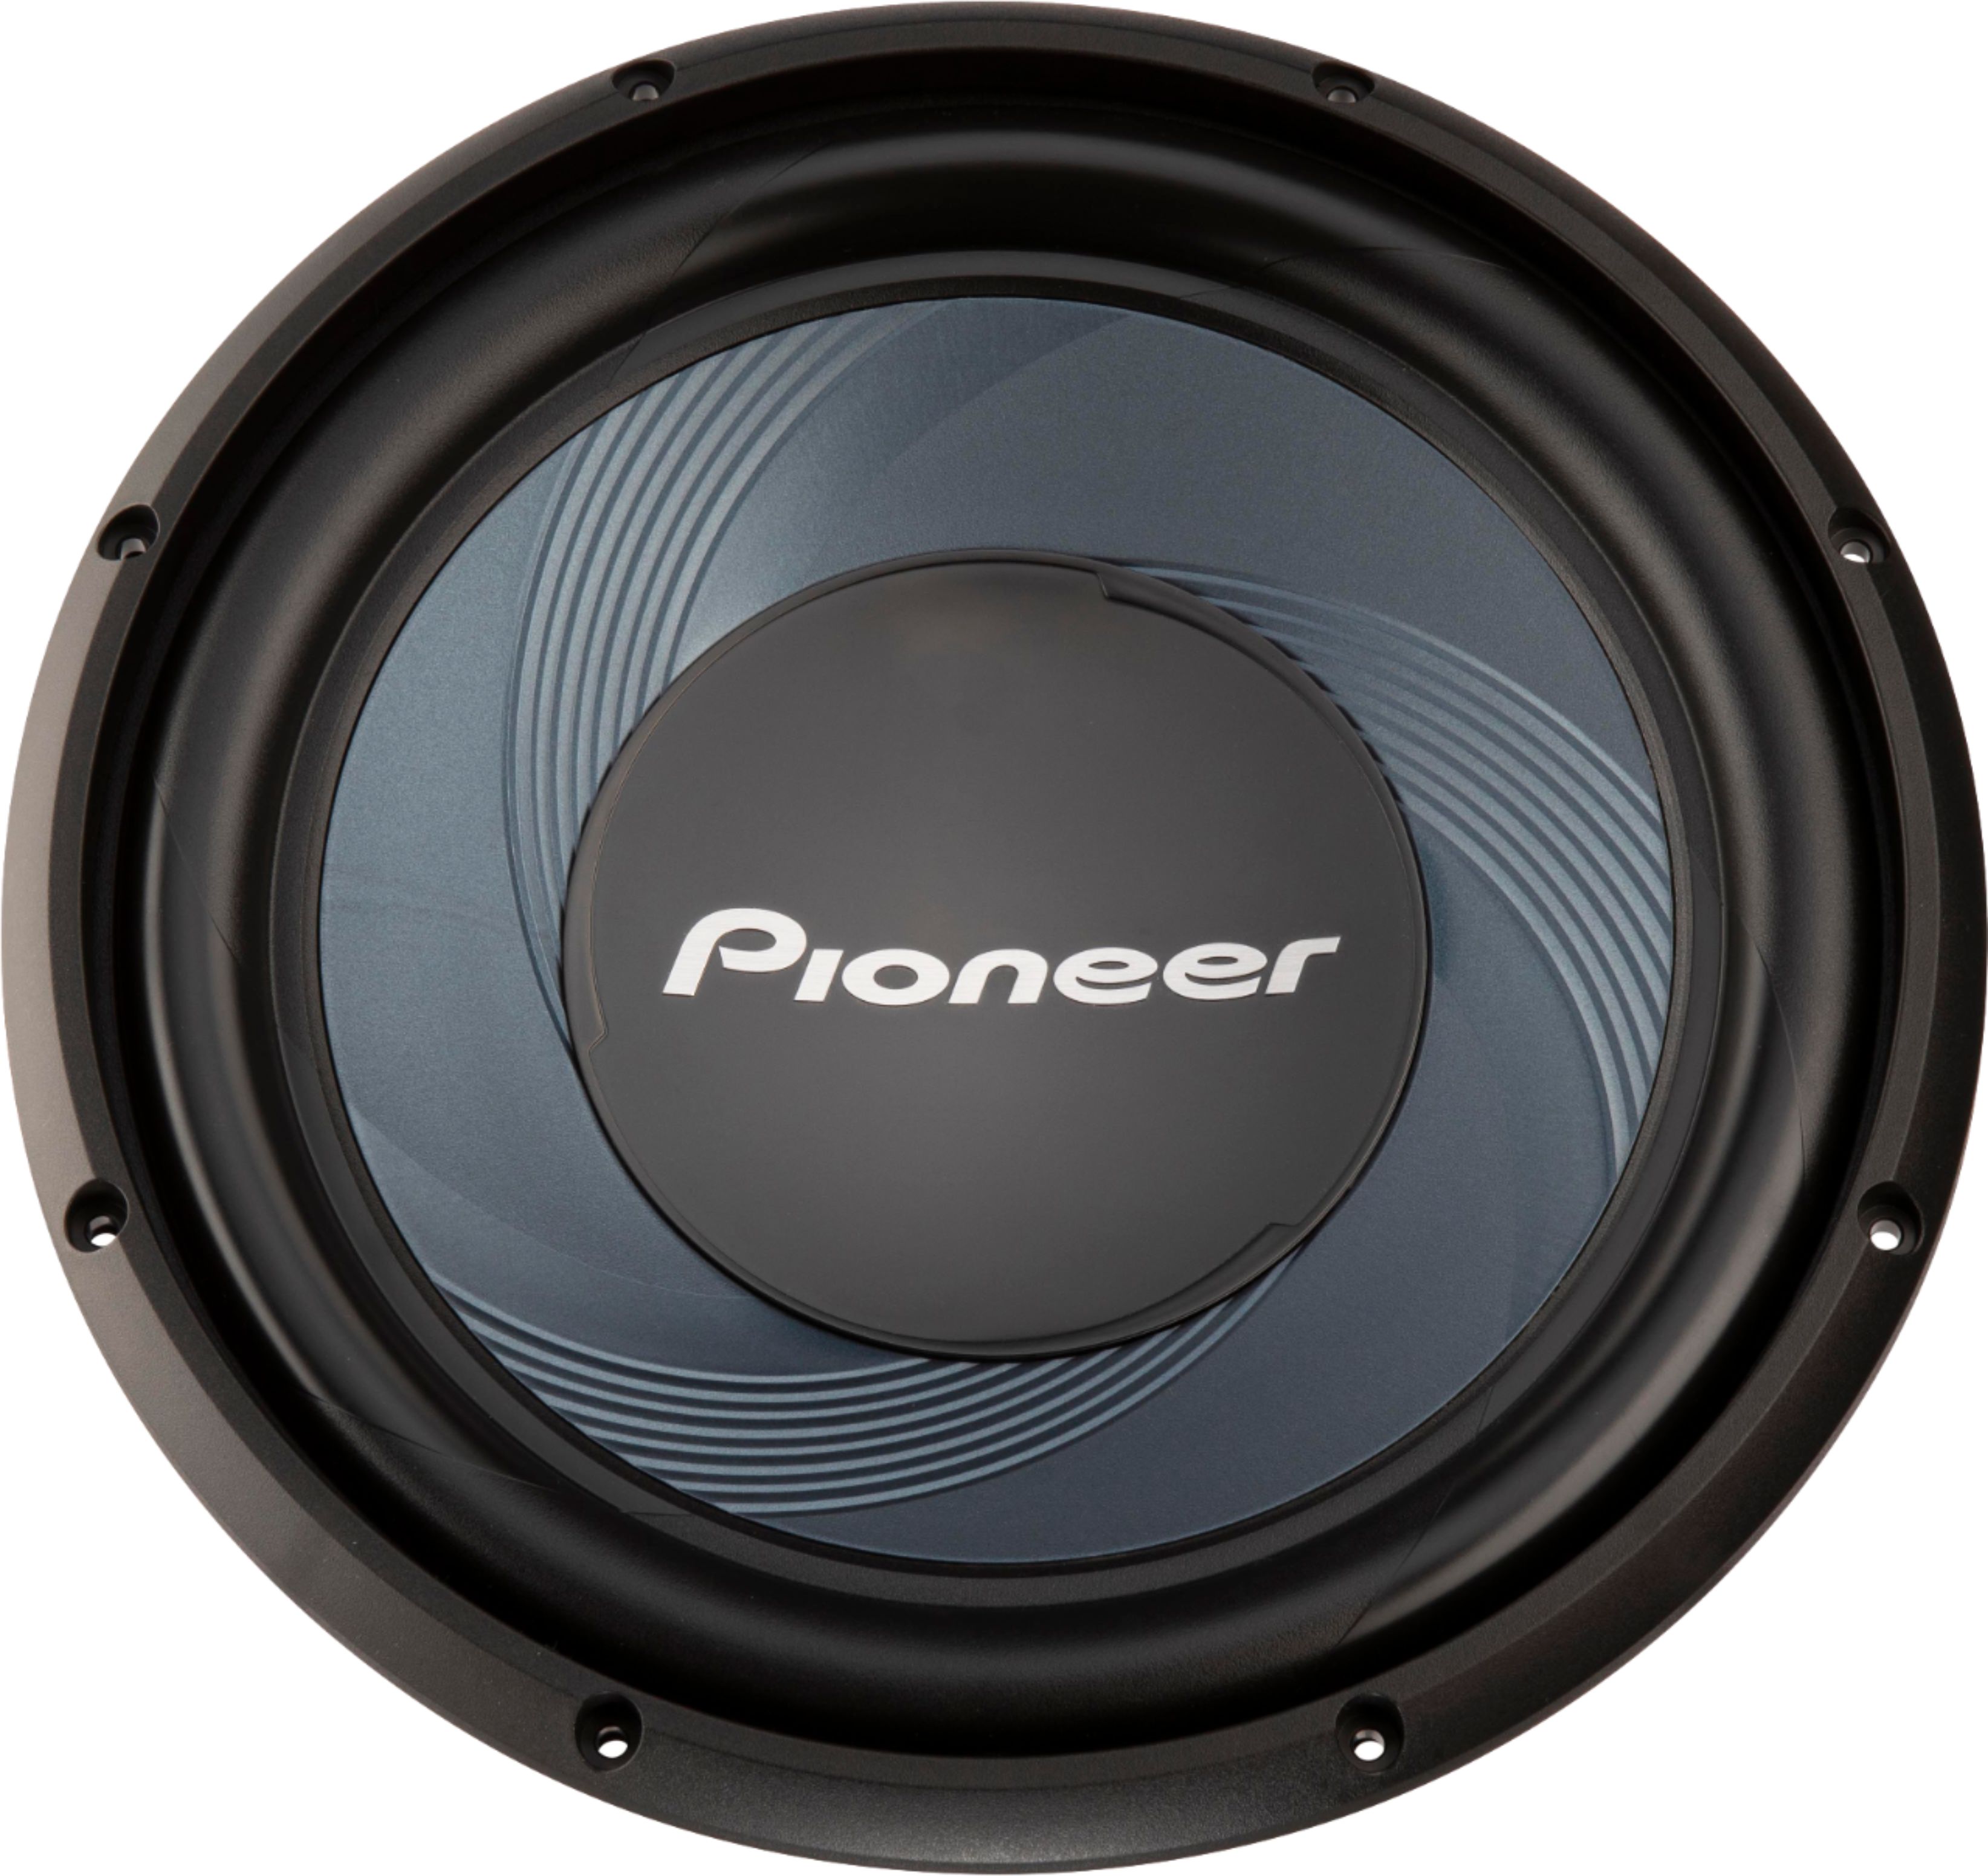 Pioneer 12" 1400 W Max Power, Single 4-ohm Voice IMPP™ cone, Rubber Component Subwoofer BLUE - Best Buy